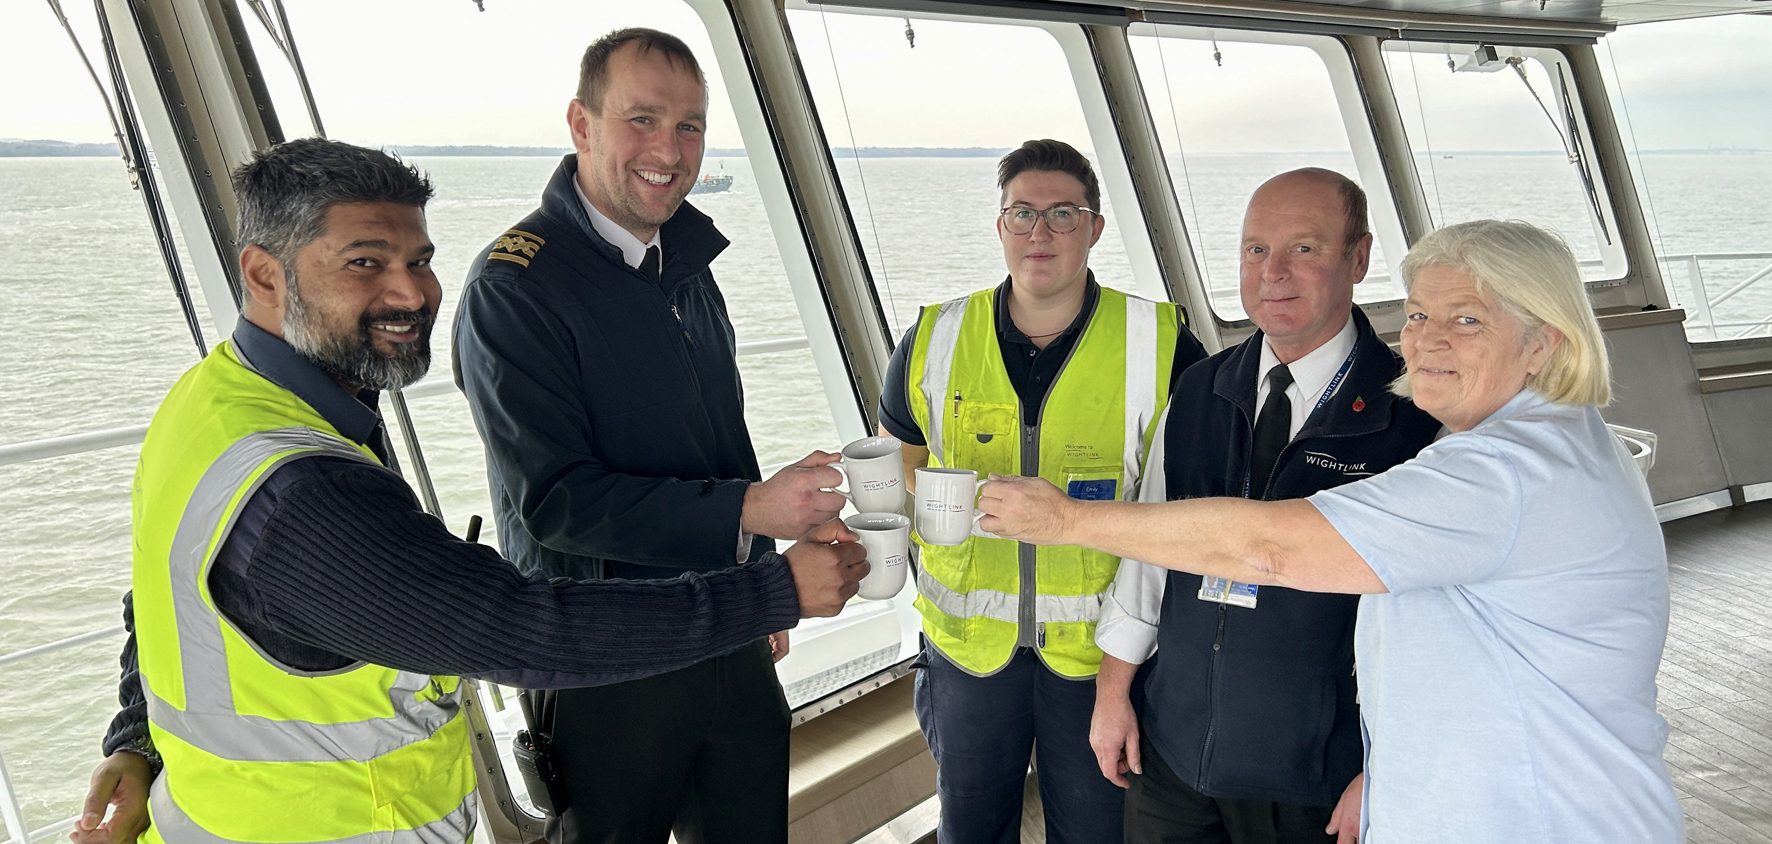 Victoria of Wight's crew toast Wightlink's Gold in the British Travel Awards